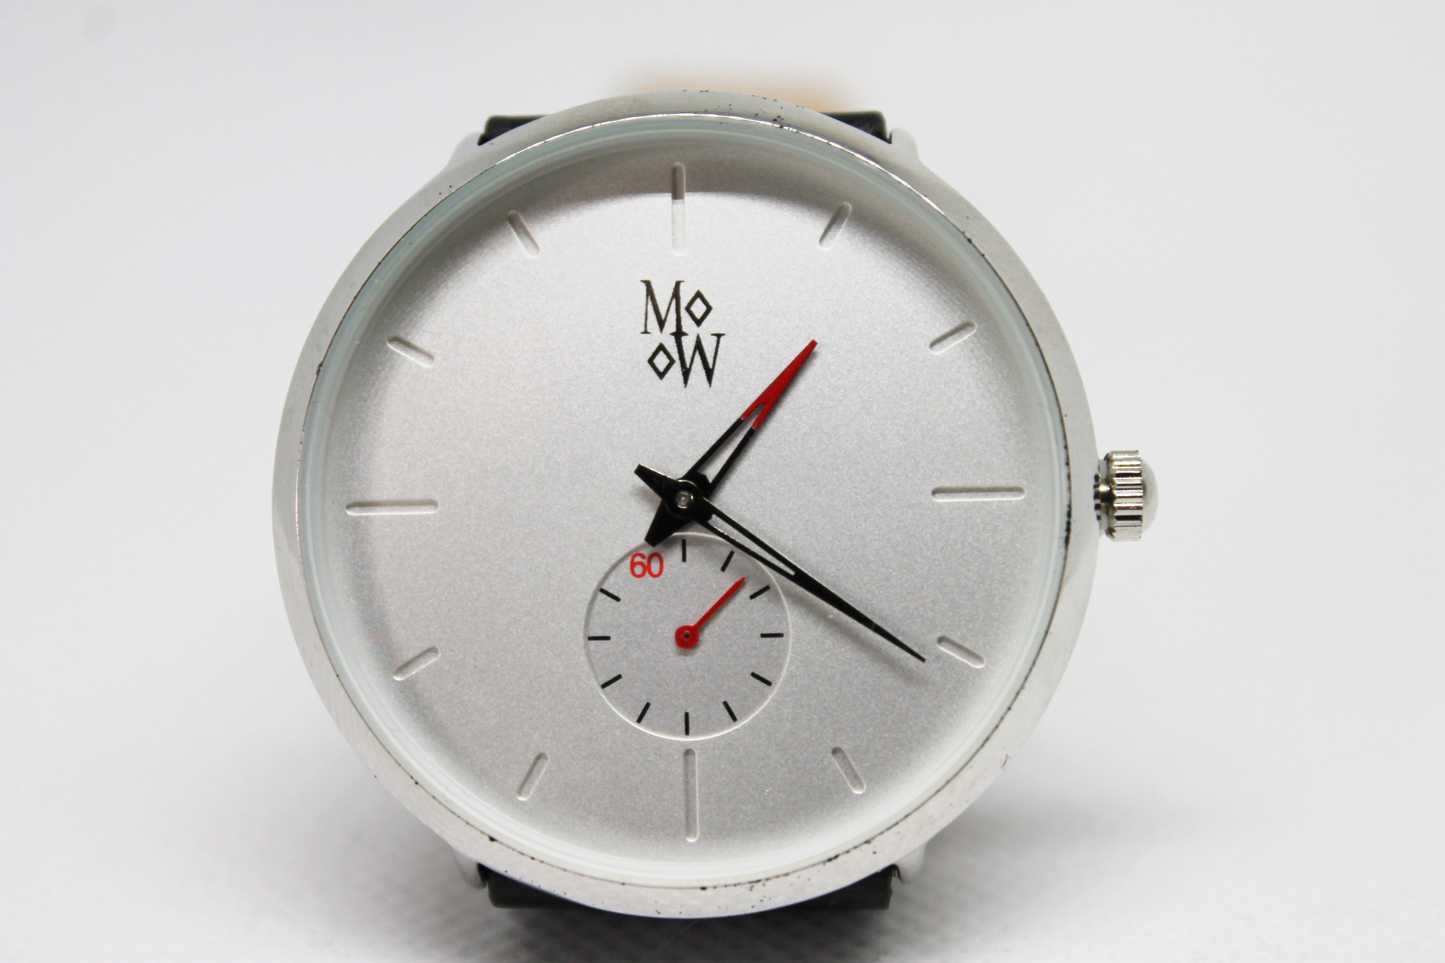 Limited Edition Toronto White With Red Accent - The Mobilio Watch Company